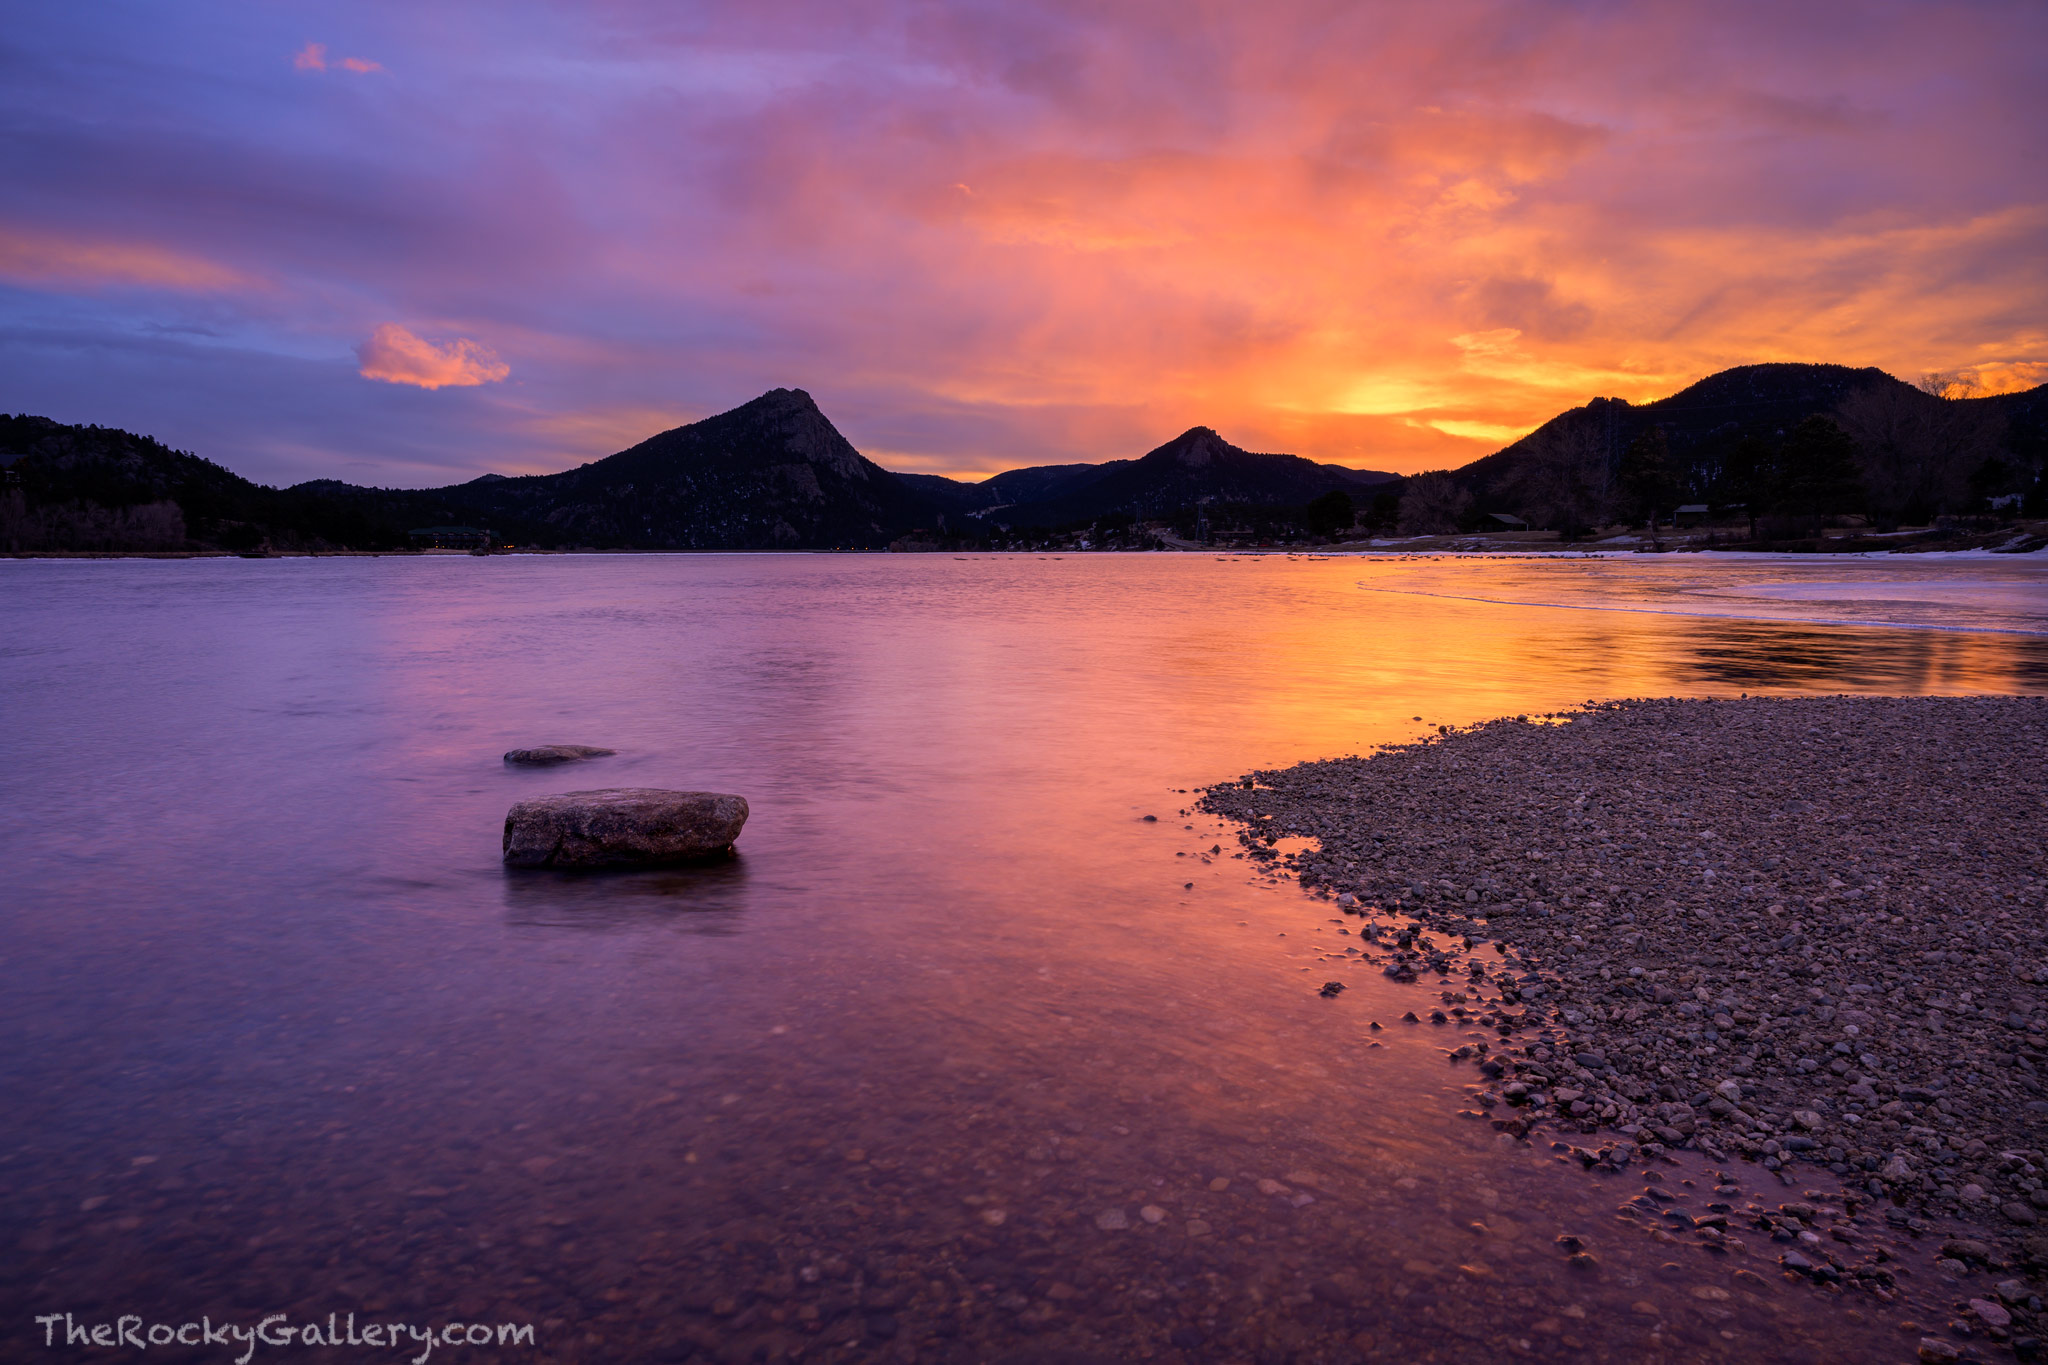 A brilliant sunrise unfolds over Lake Estes just east of Rocky Mountain National Park. While Estes Park is well known as being...